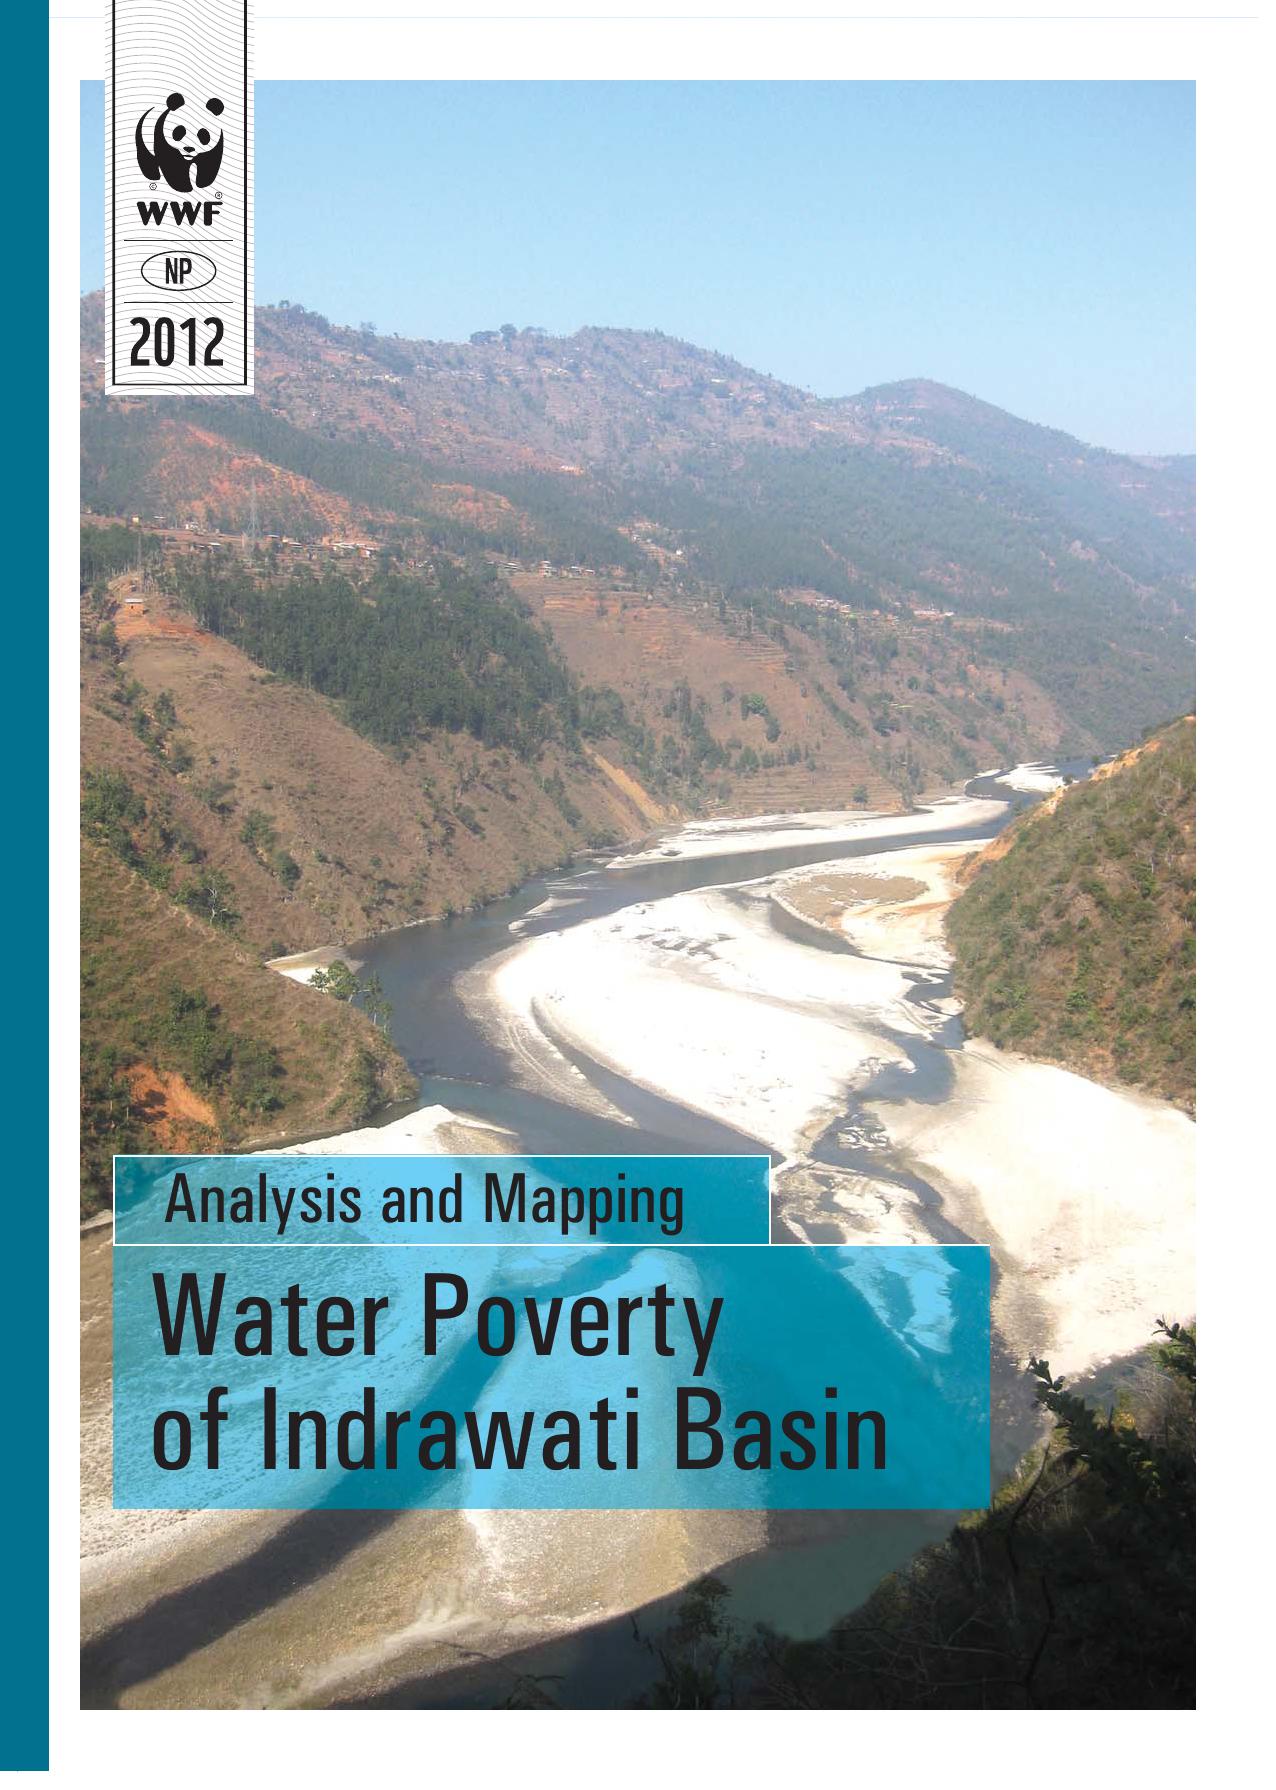 Analysis and Mapping: Water Poverty of Indrawati Basin